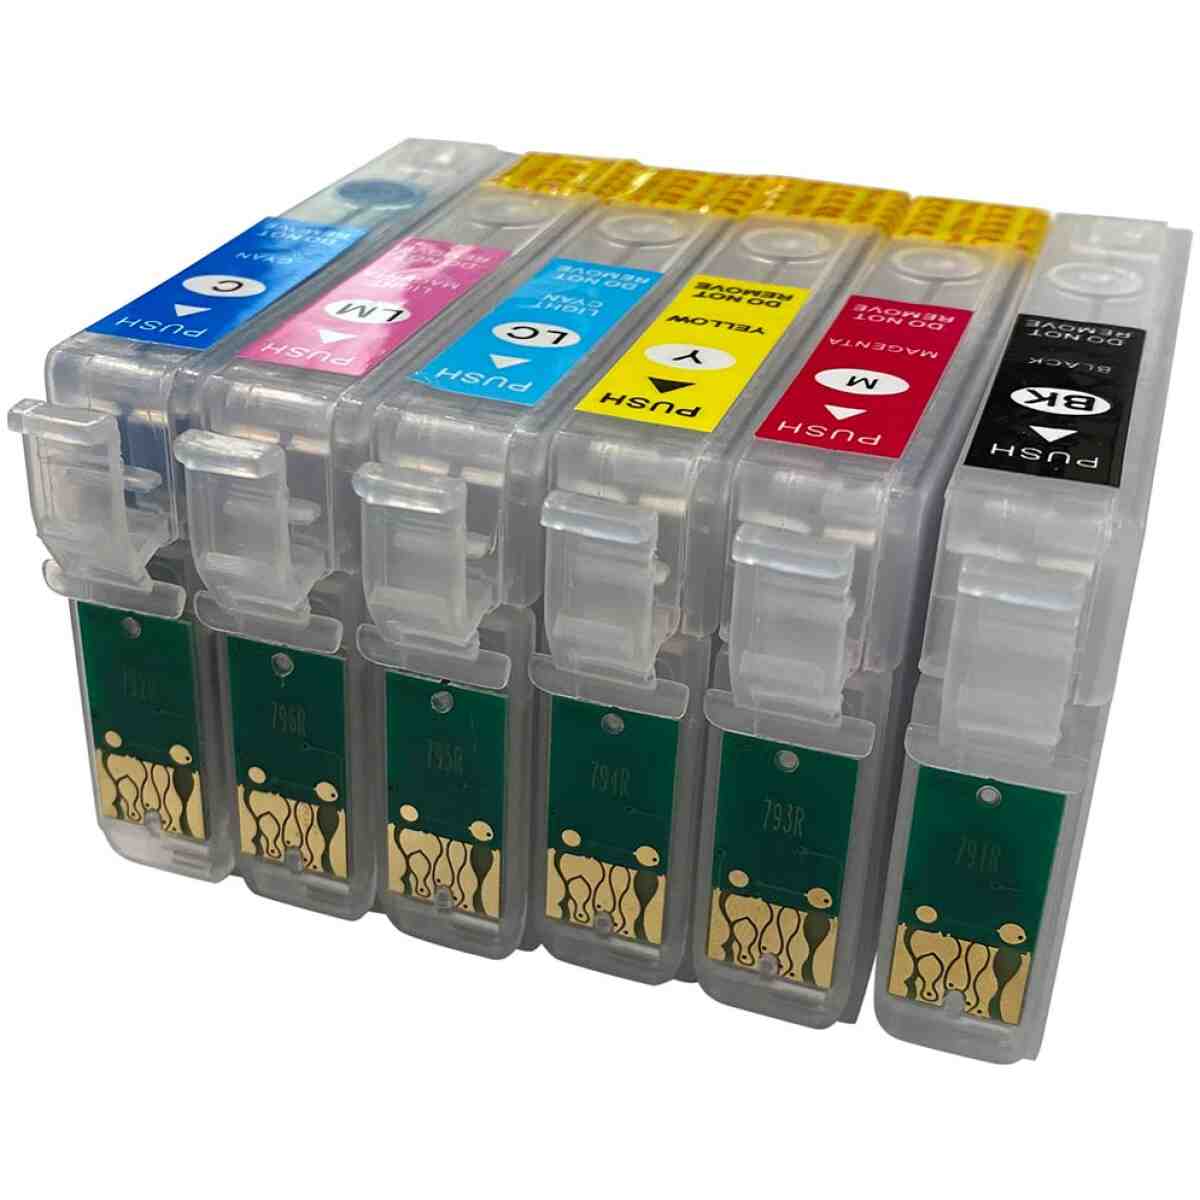 Epson 1400 Refillable Cartridge Set W/ 6 Syringes & Long Needles TOTAL INK SOLUTIONS®